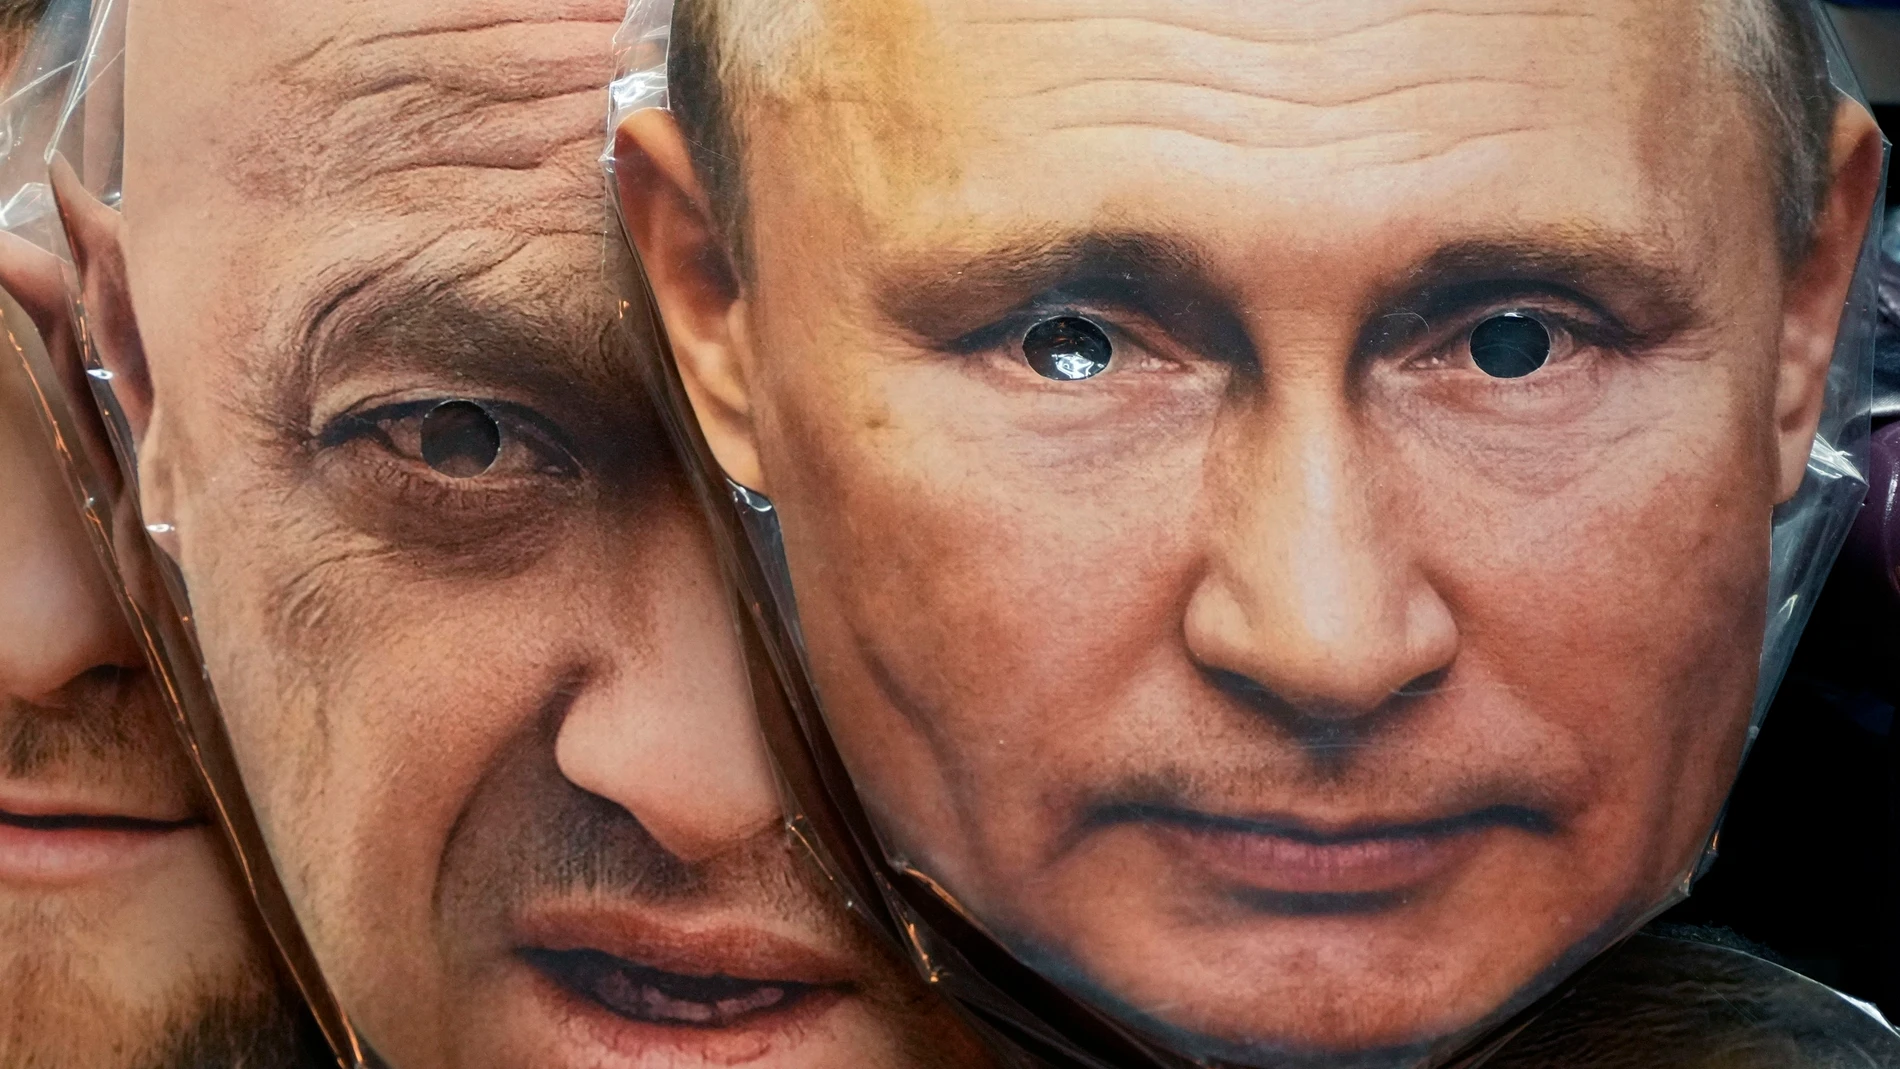 FILE - Face masks depicting Russian President Vladimir Putin, right, and owner of private military company Wagner Group Yevgeny Prigozhin are displayed among others for sale at a souvenir shop in St. Petersburg, Russia, on June 4, 2023. Prigozhin was aboard a plane that crashed north of Moscow on Wednesday, Aug. 23, 2023 killing all 10 people on board. On Sunday, Russia's Investigative Committee said forensic and genetic testing identified all 10 bodies recovered from the crash, and the ident...